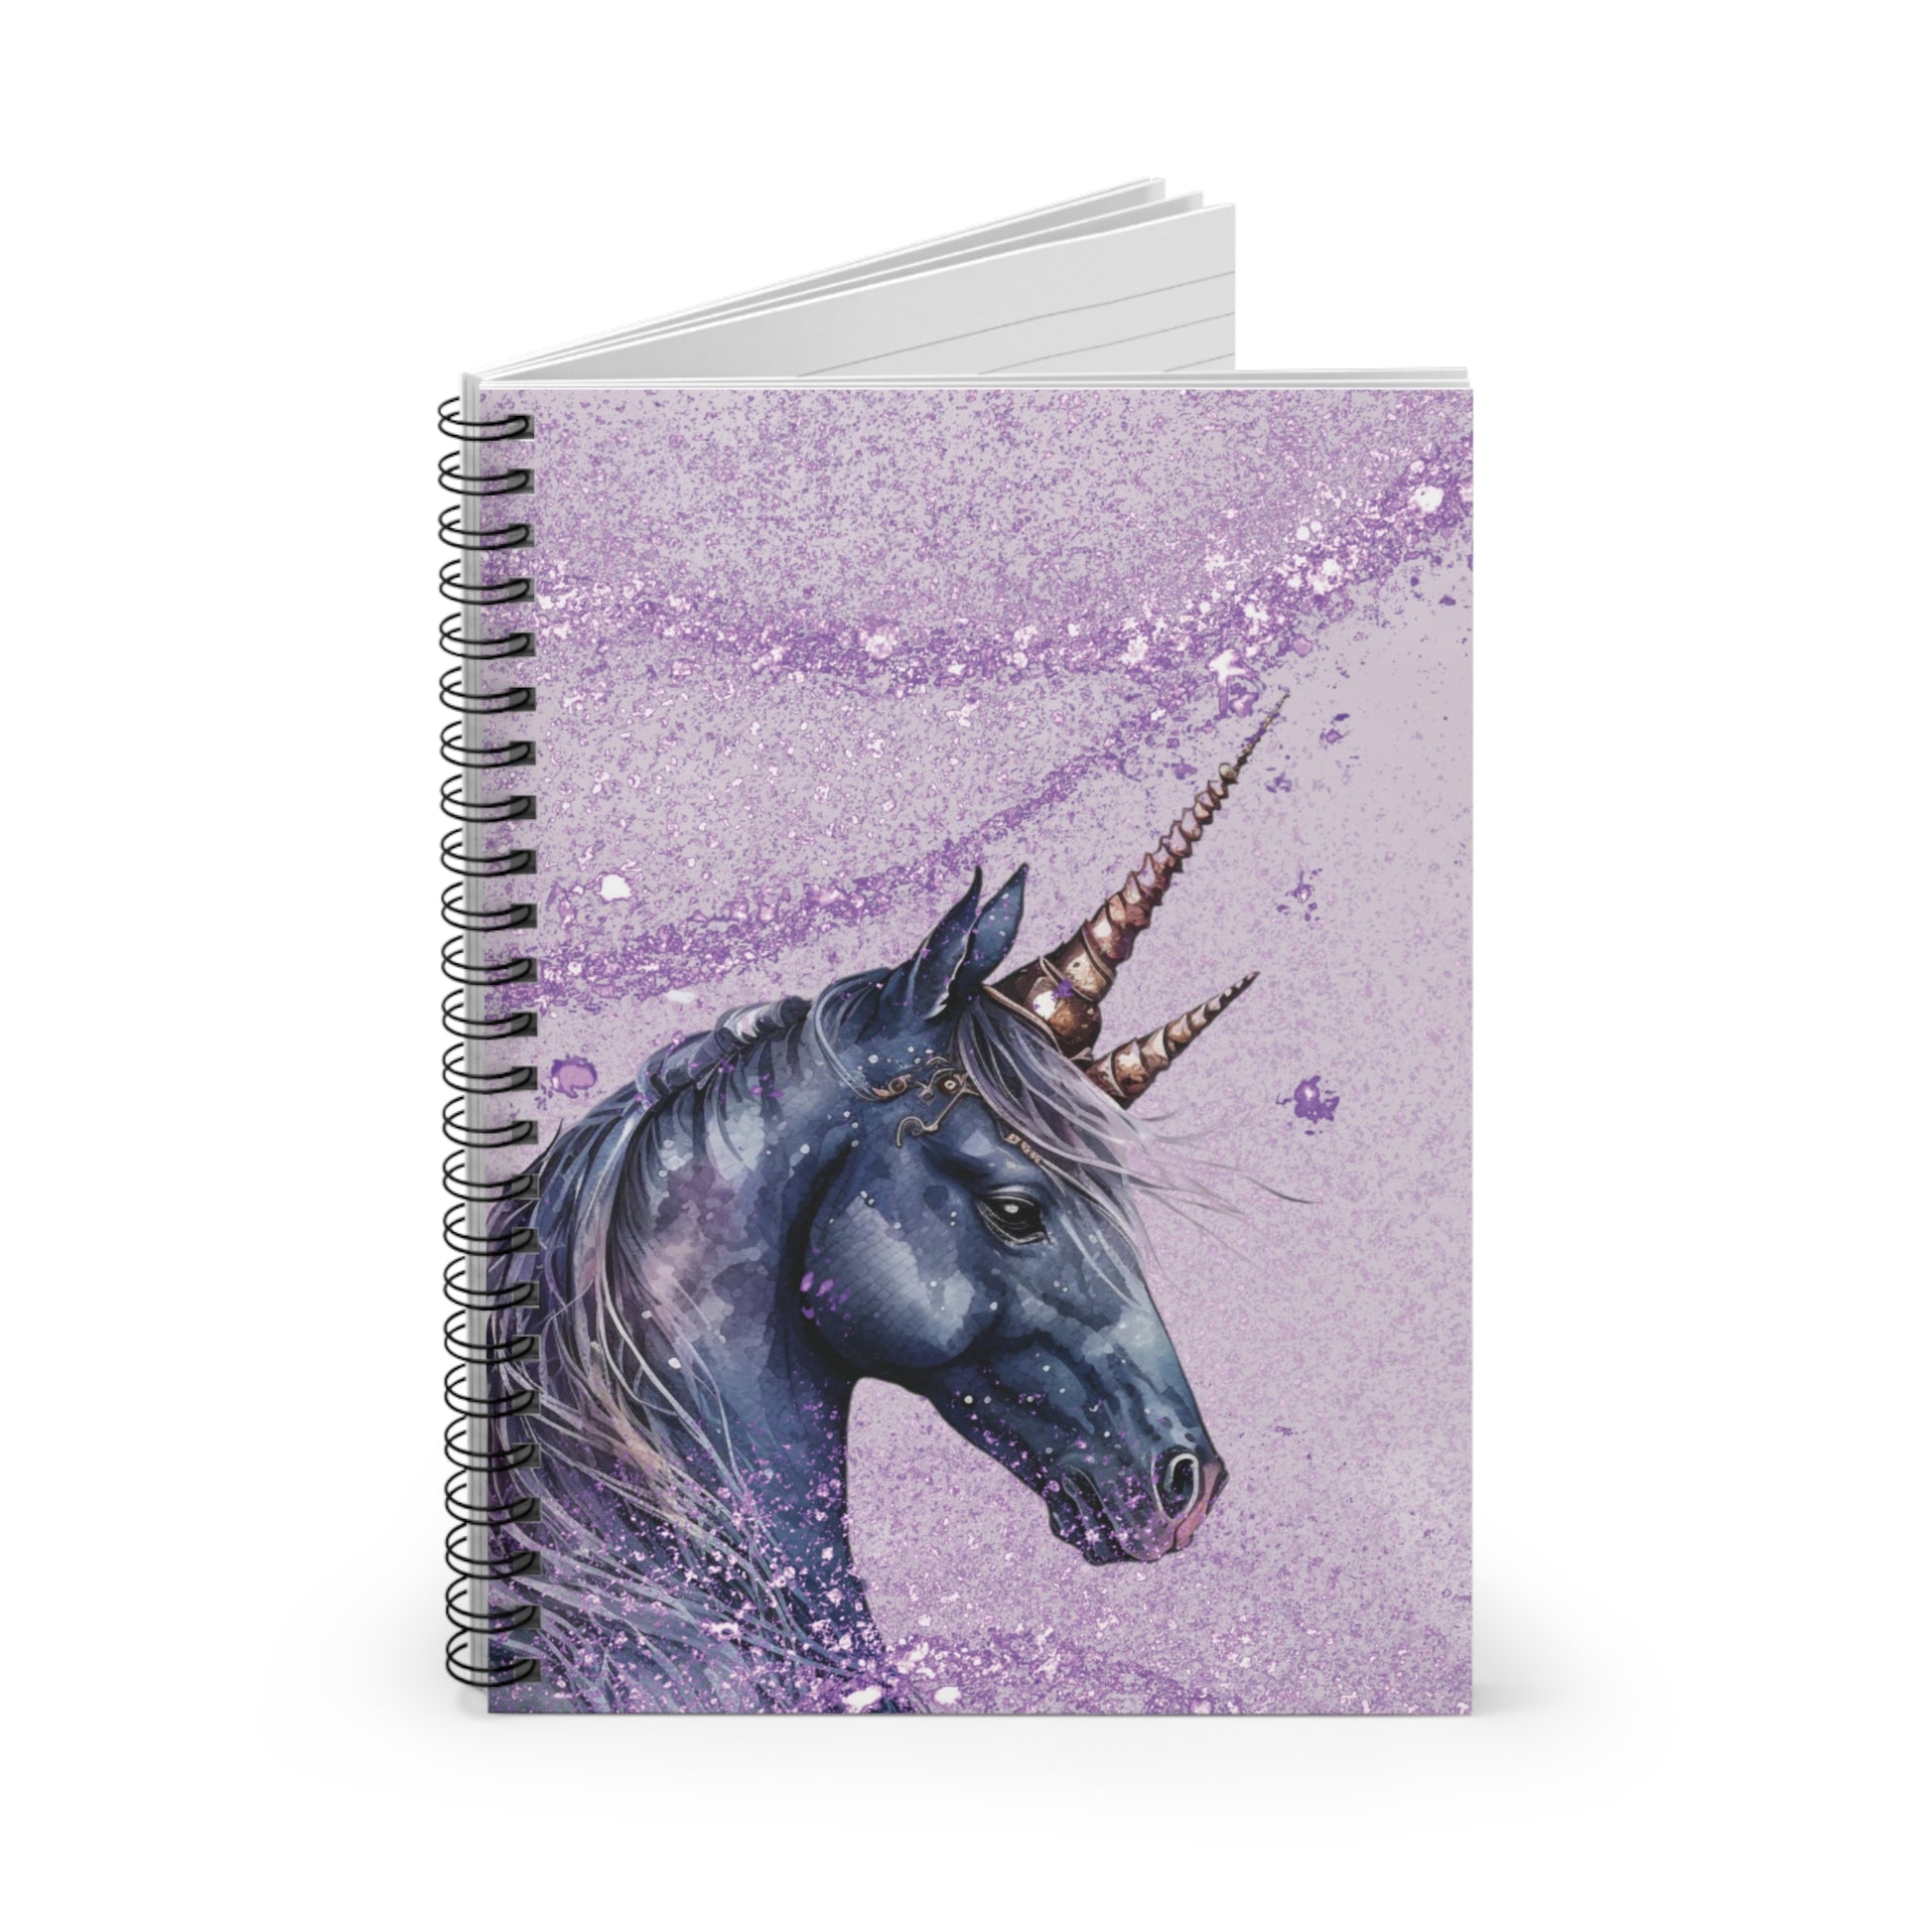 Magic Happens Here: Spiral Notebook - Log Books - Journals - Diaries - and More Custom Printed by TheGlassyLass